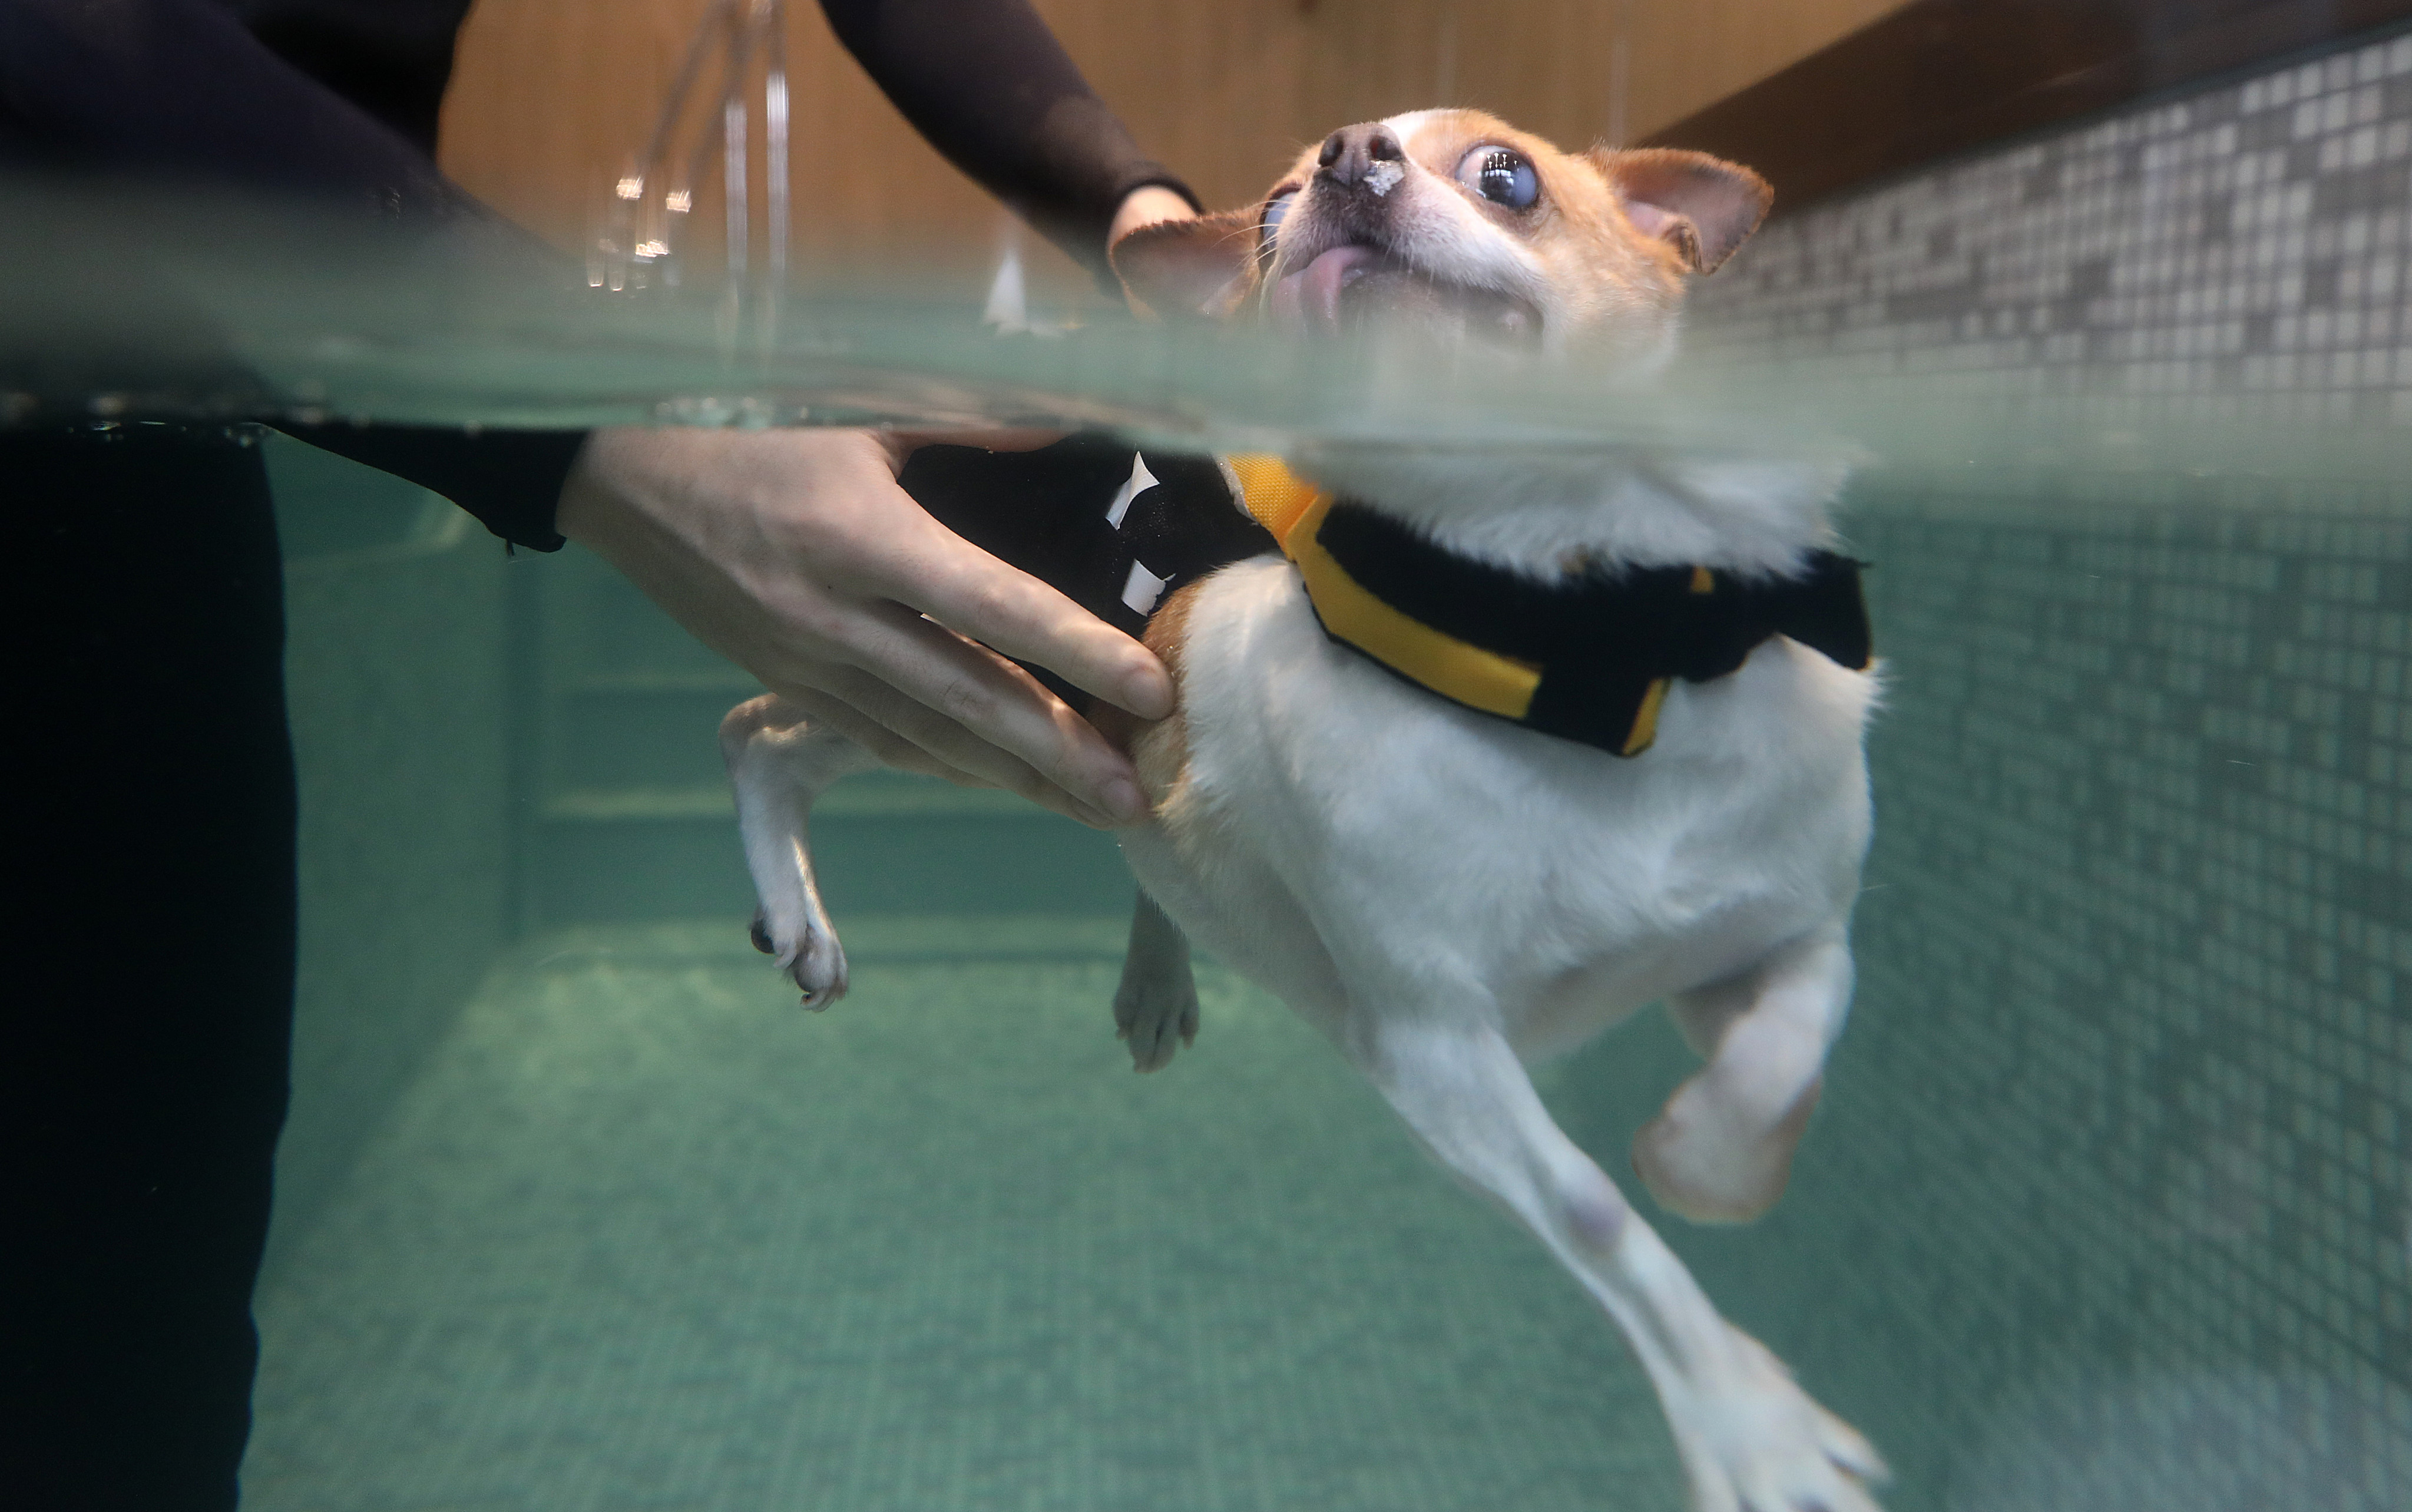 Consumer watchdog tells owners to be cautious when taking their pets swimming. Photo: Nora Tam